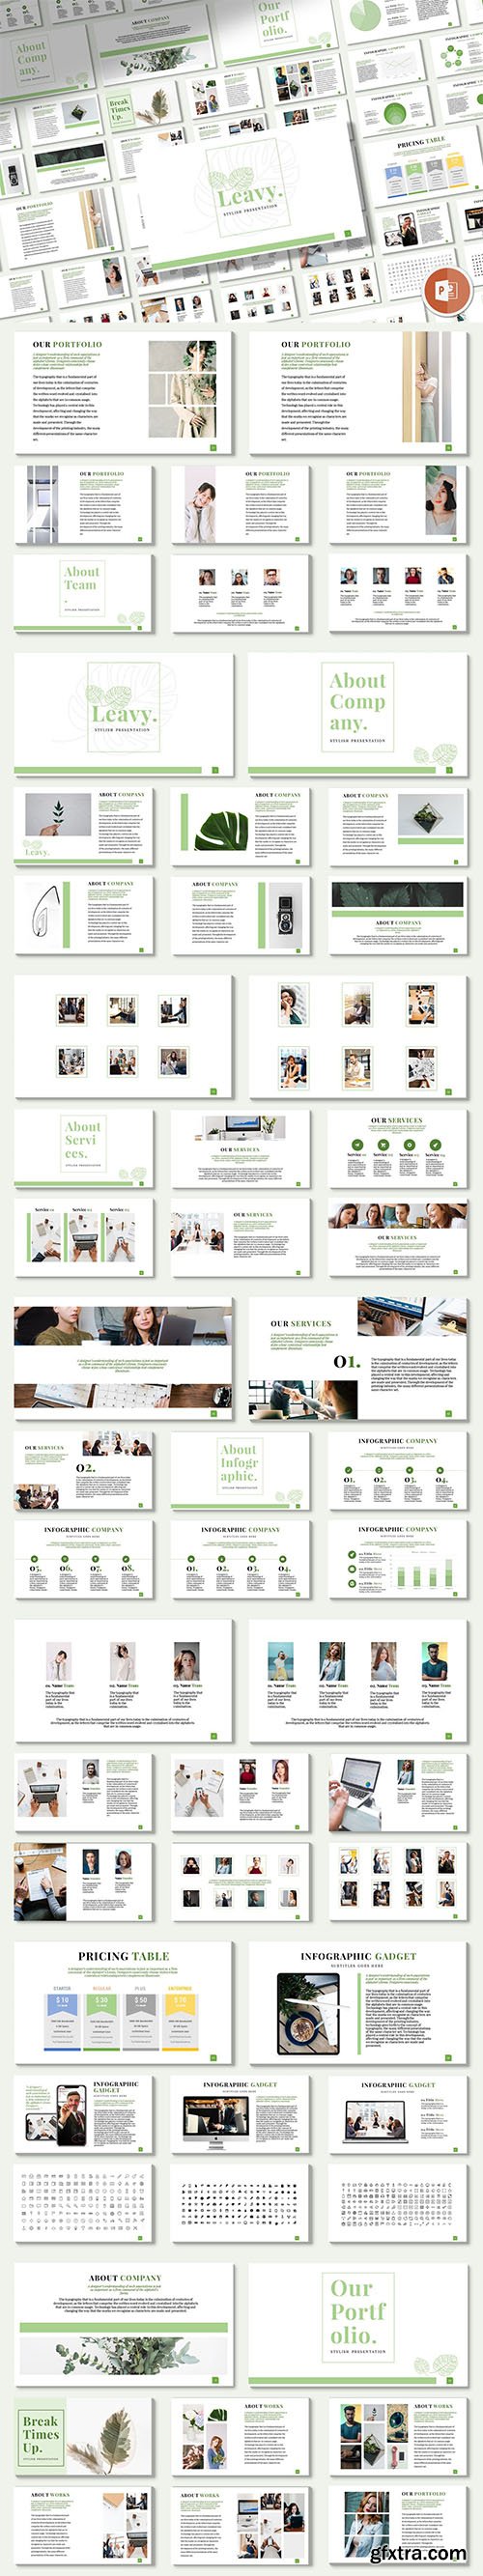 Leavy - Powerpoint Templates